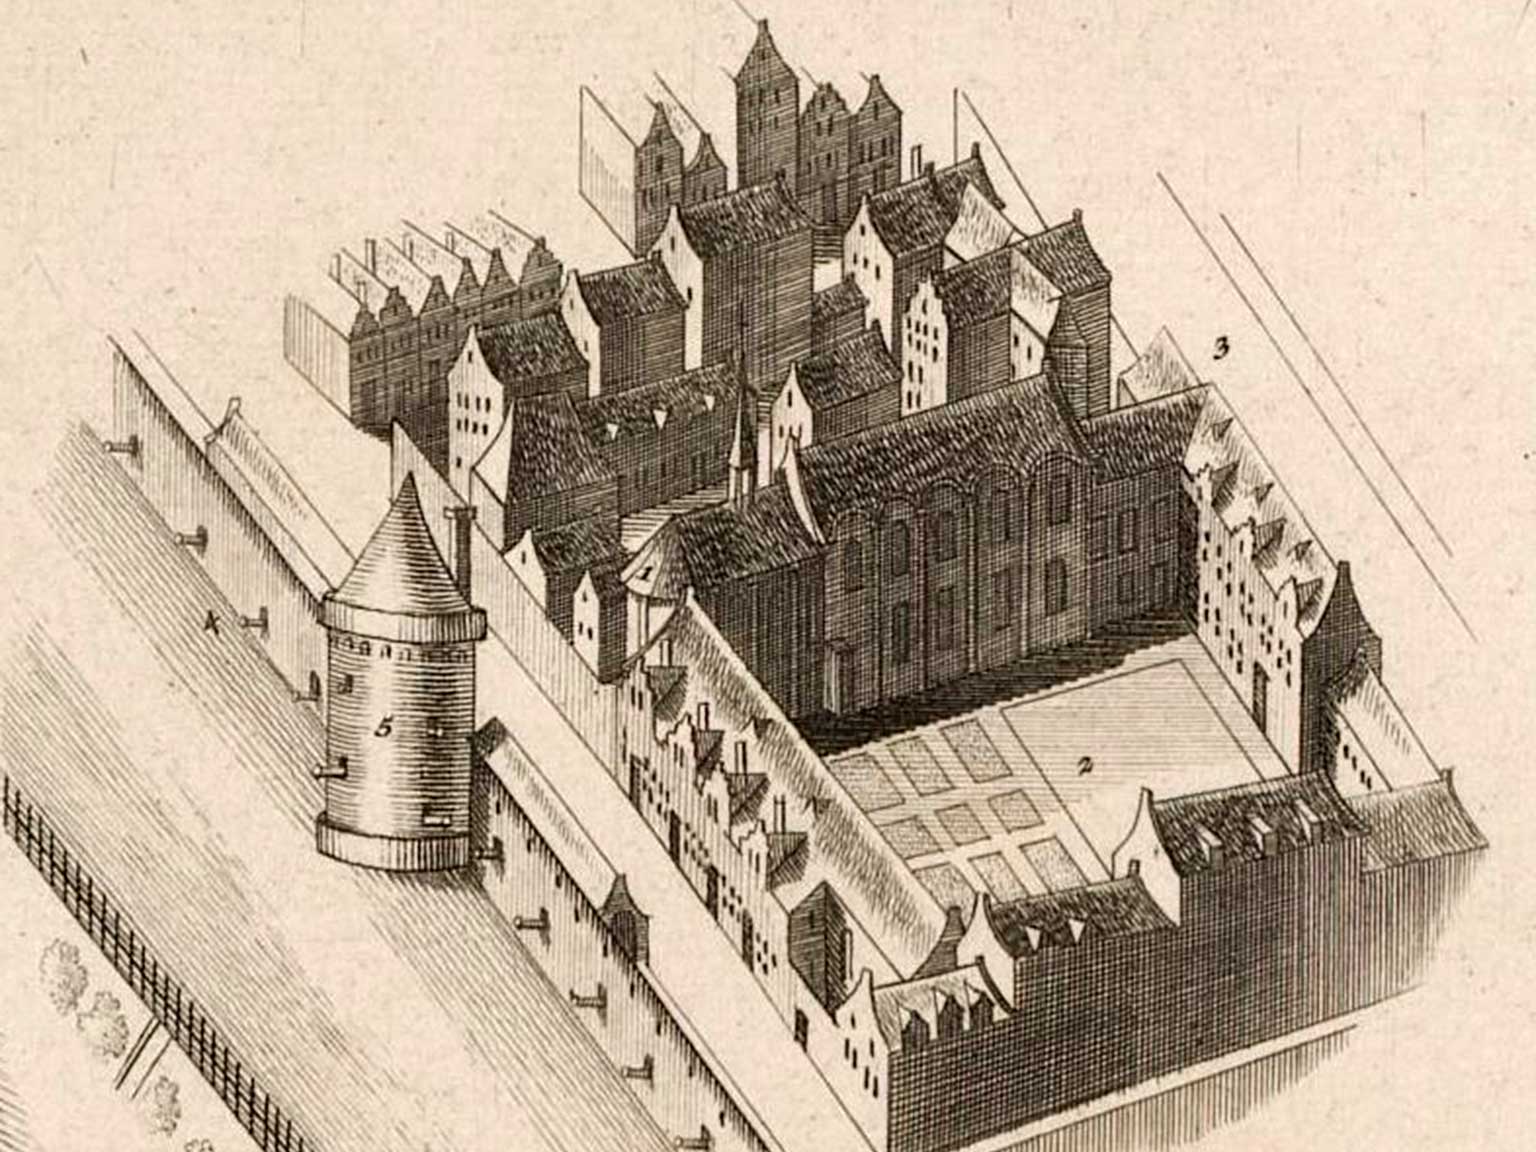 Drawing of the Bethaniënklooster, Amsterdam in 1544